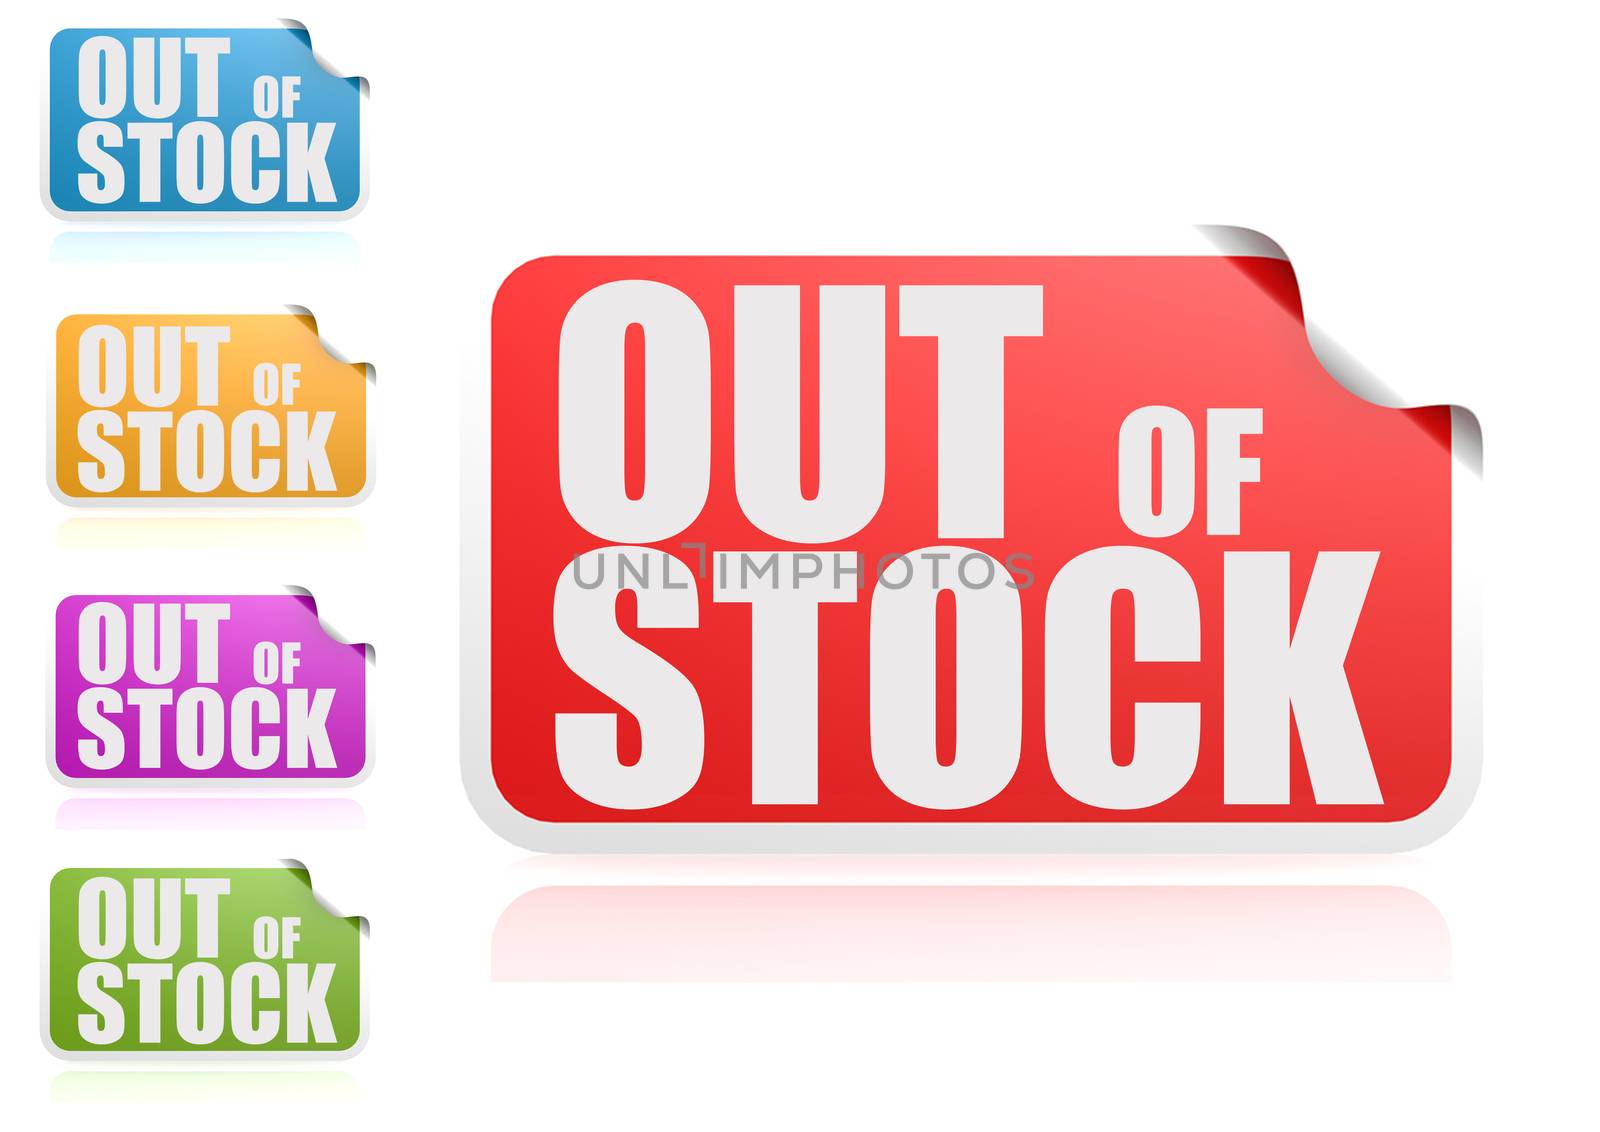 Out of stock label set